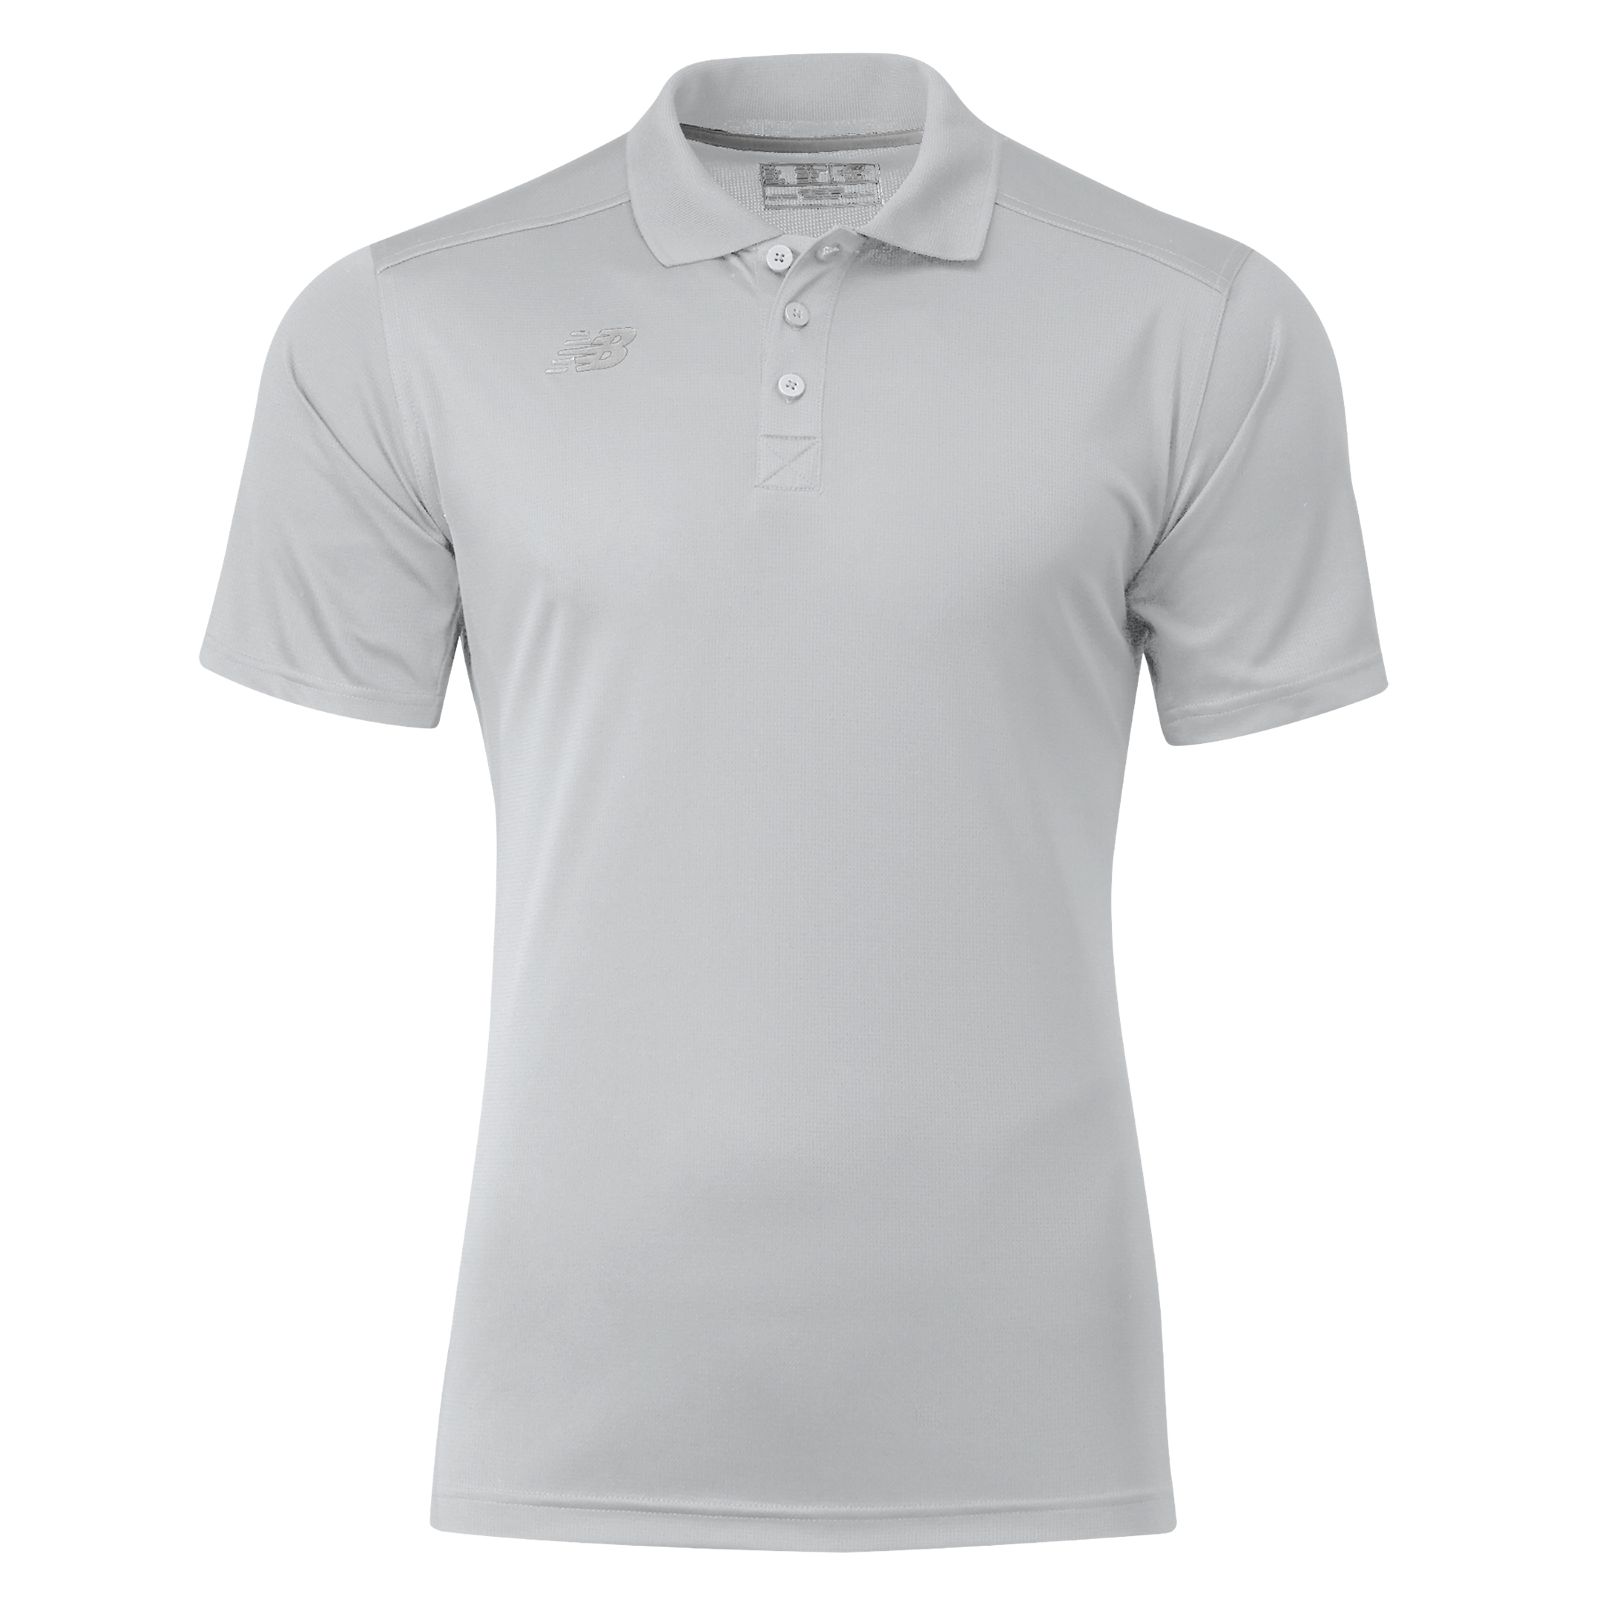 Men's Performance Tech Polo, Light Grey image number 0